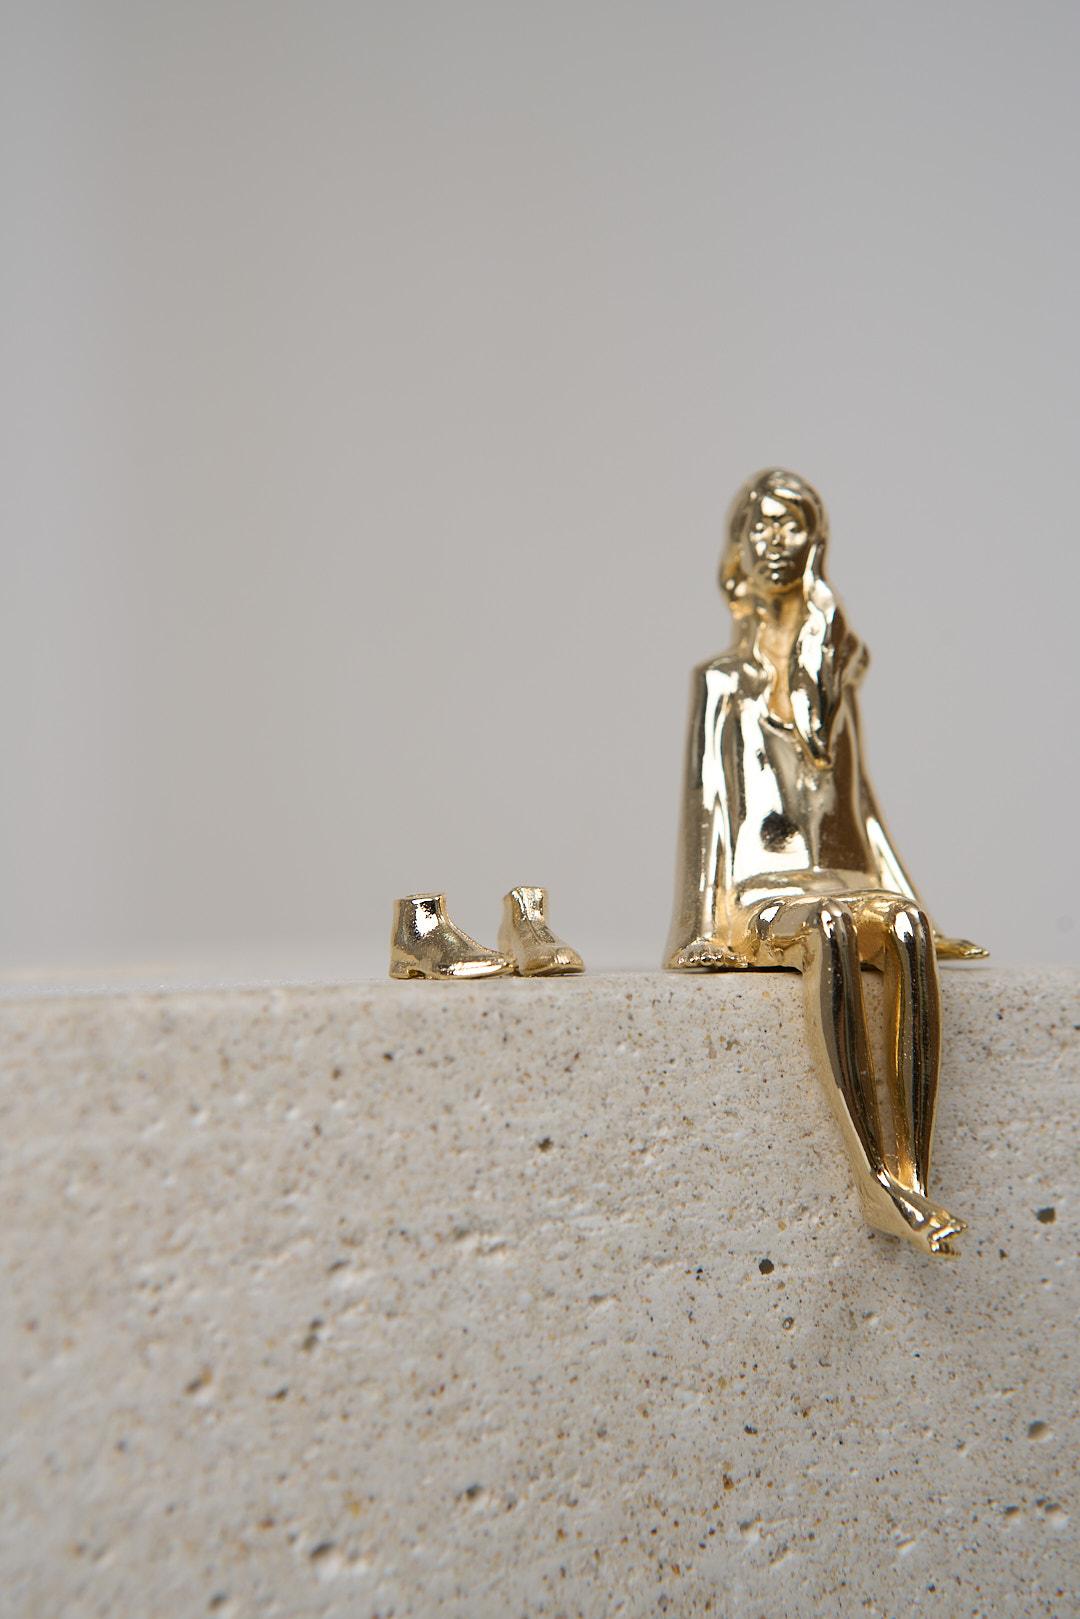 Sinestesia Series, Concrete and Brass Girl Sculpture N5 For Sale 2